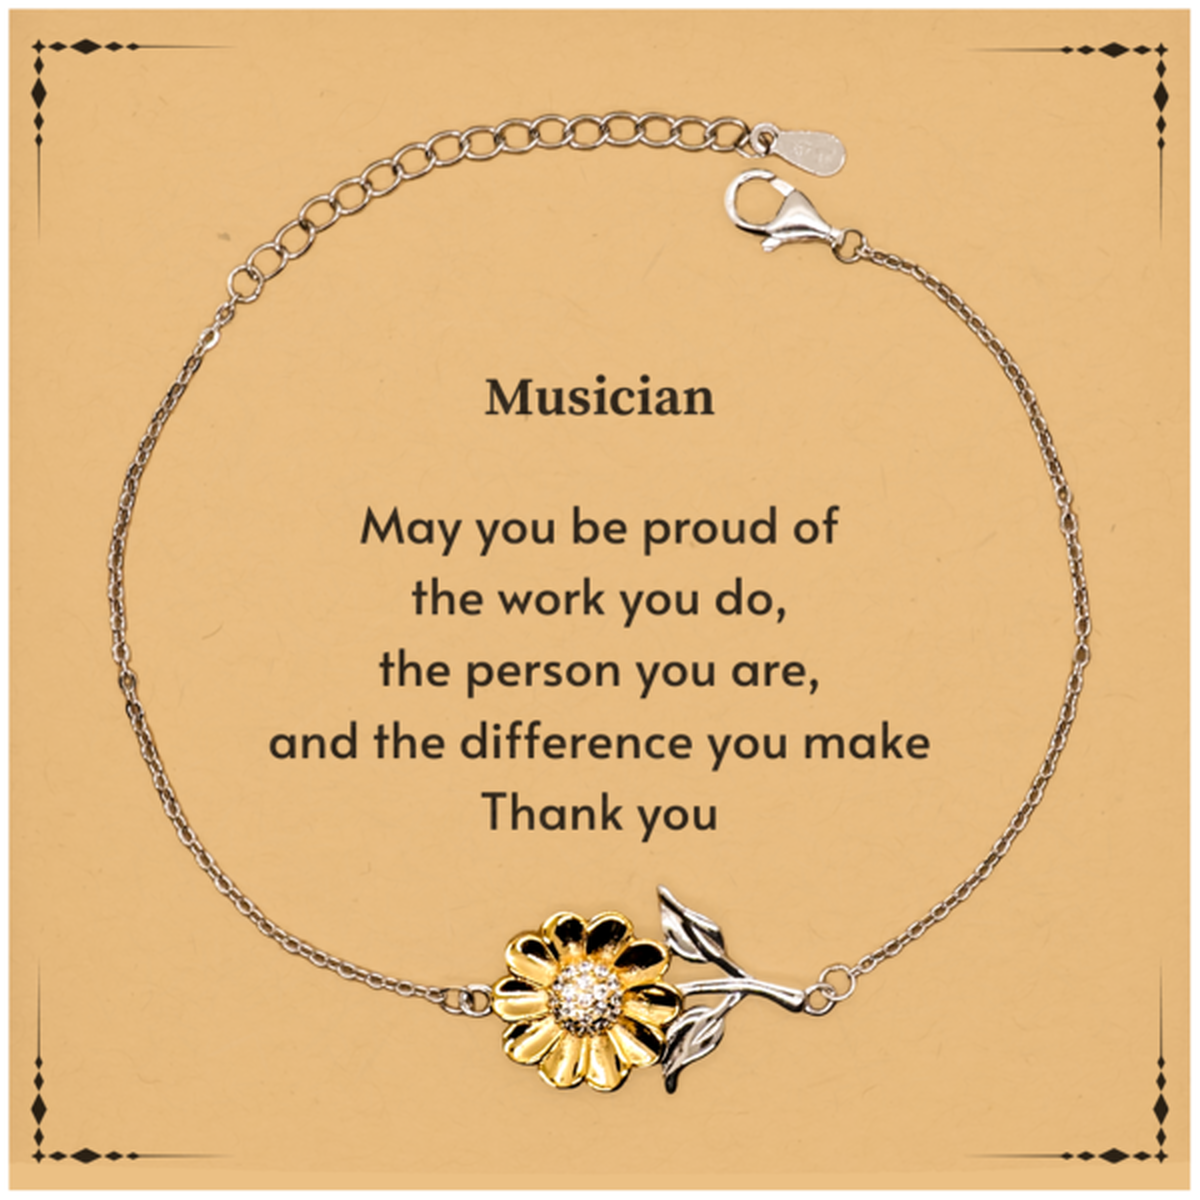 Heartwarming Sunflower Bracelet Retirement Coworkers Gifts for Musician, Musician May You be proud of the work you do, the person you are Gifts for Boss Men Women Friends